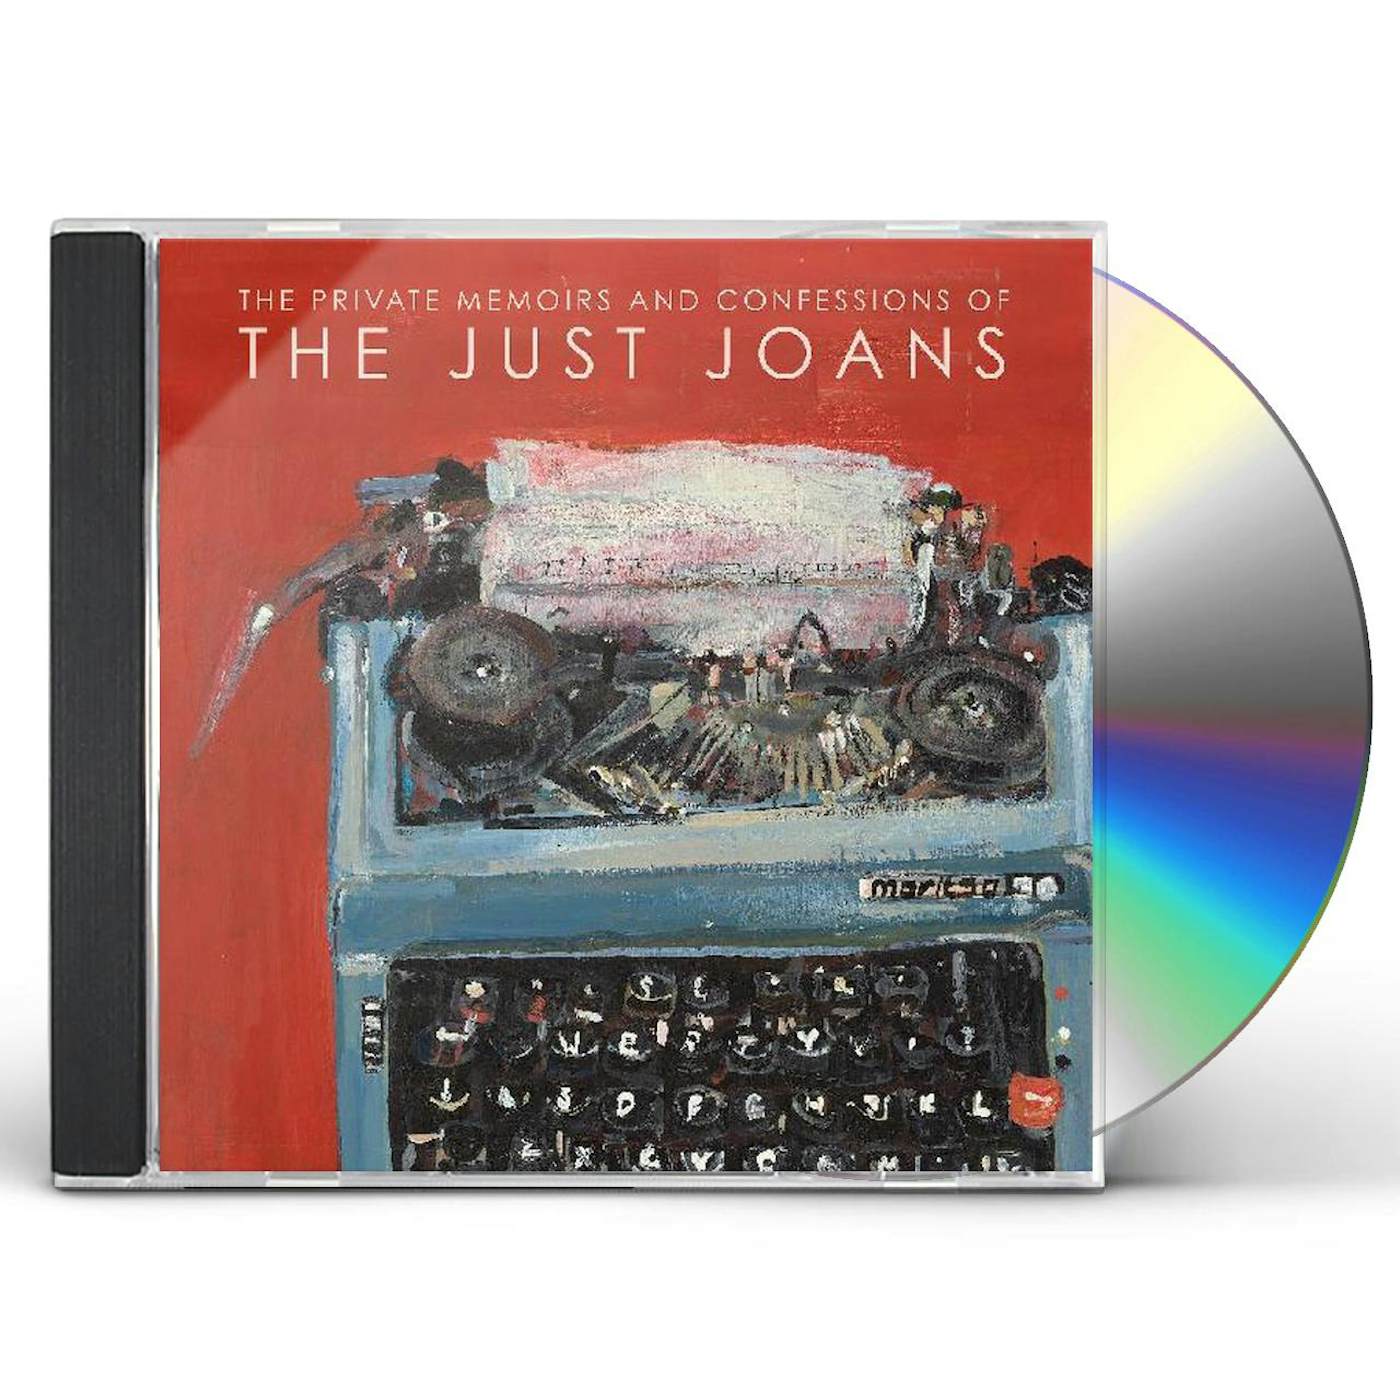 The private memoirs & confessions of the just joans CD